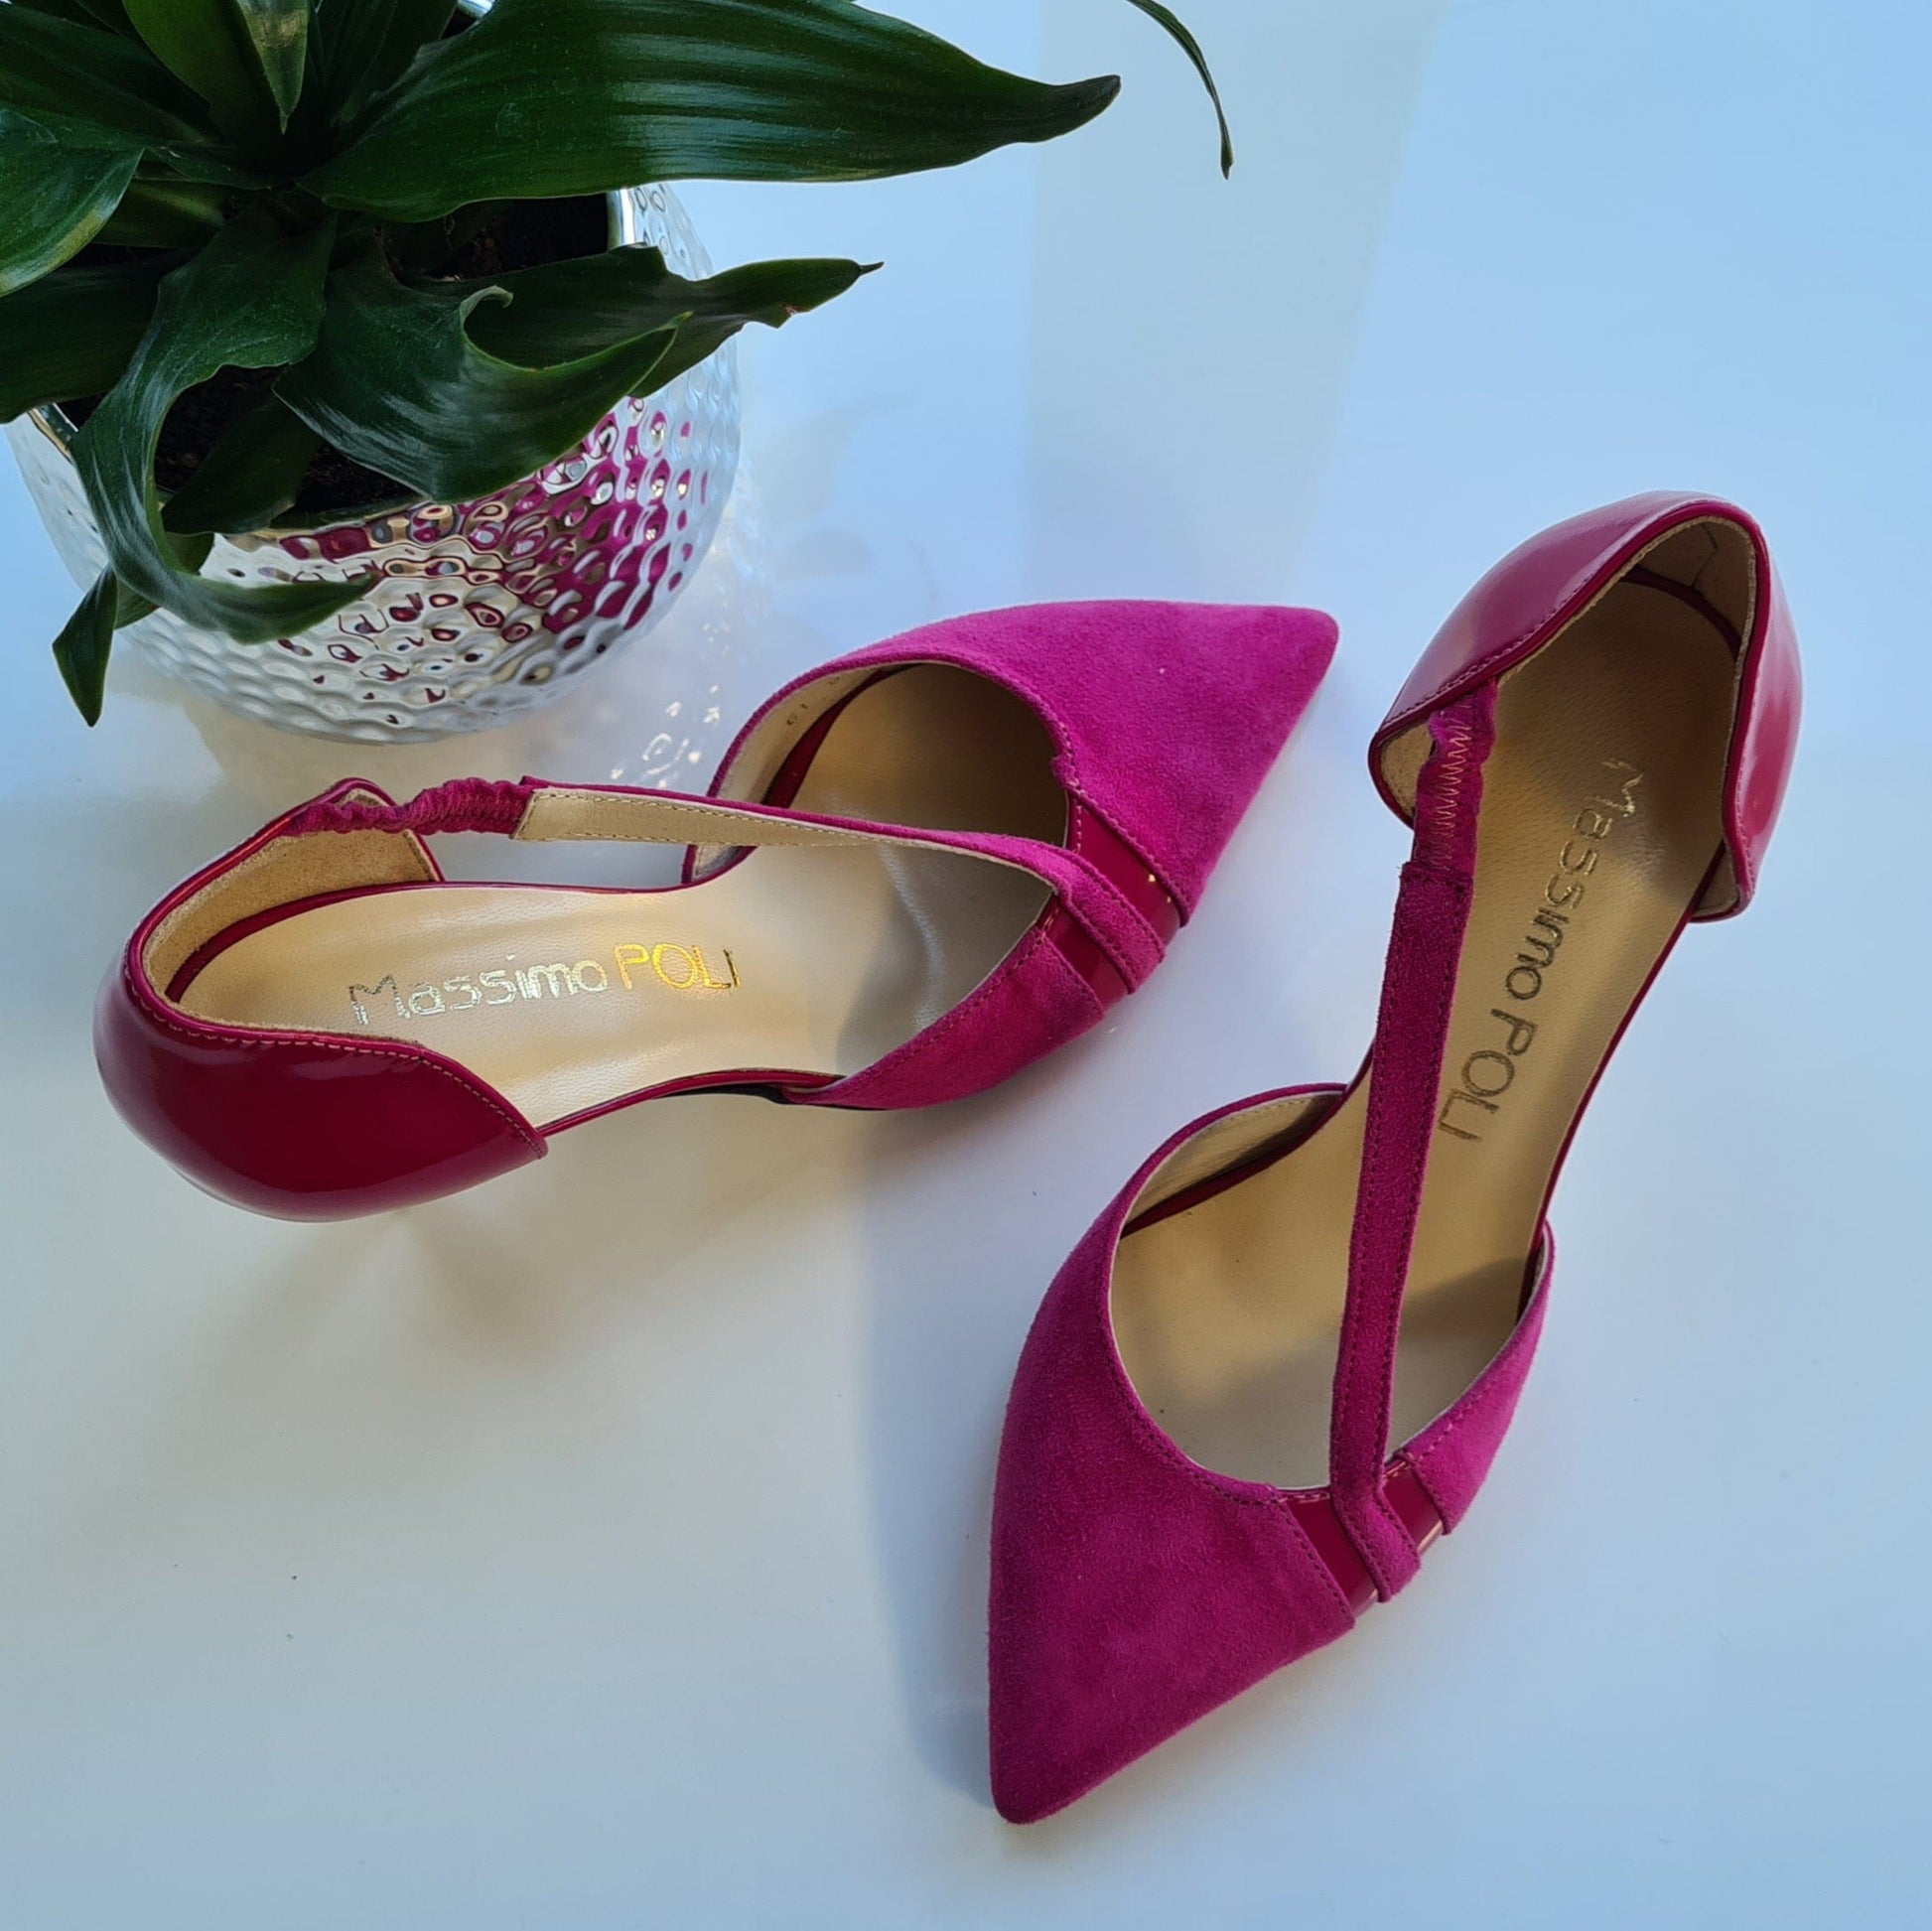 Pointed toe court heels in pink leather